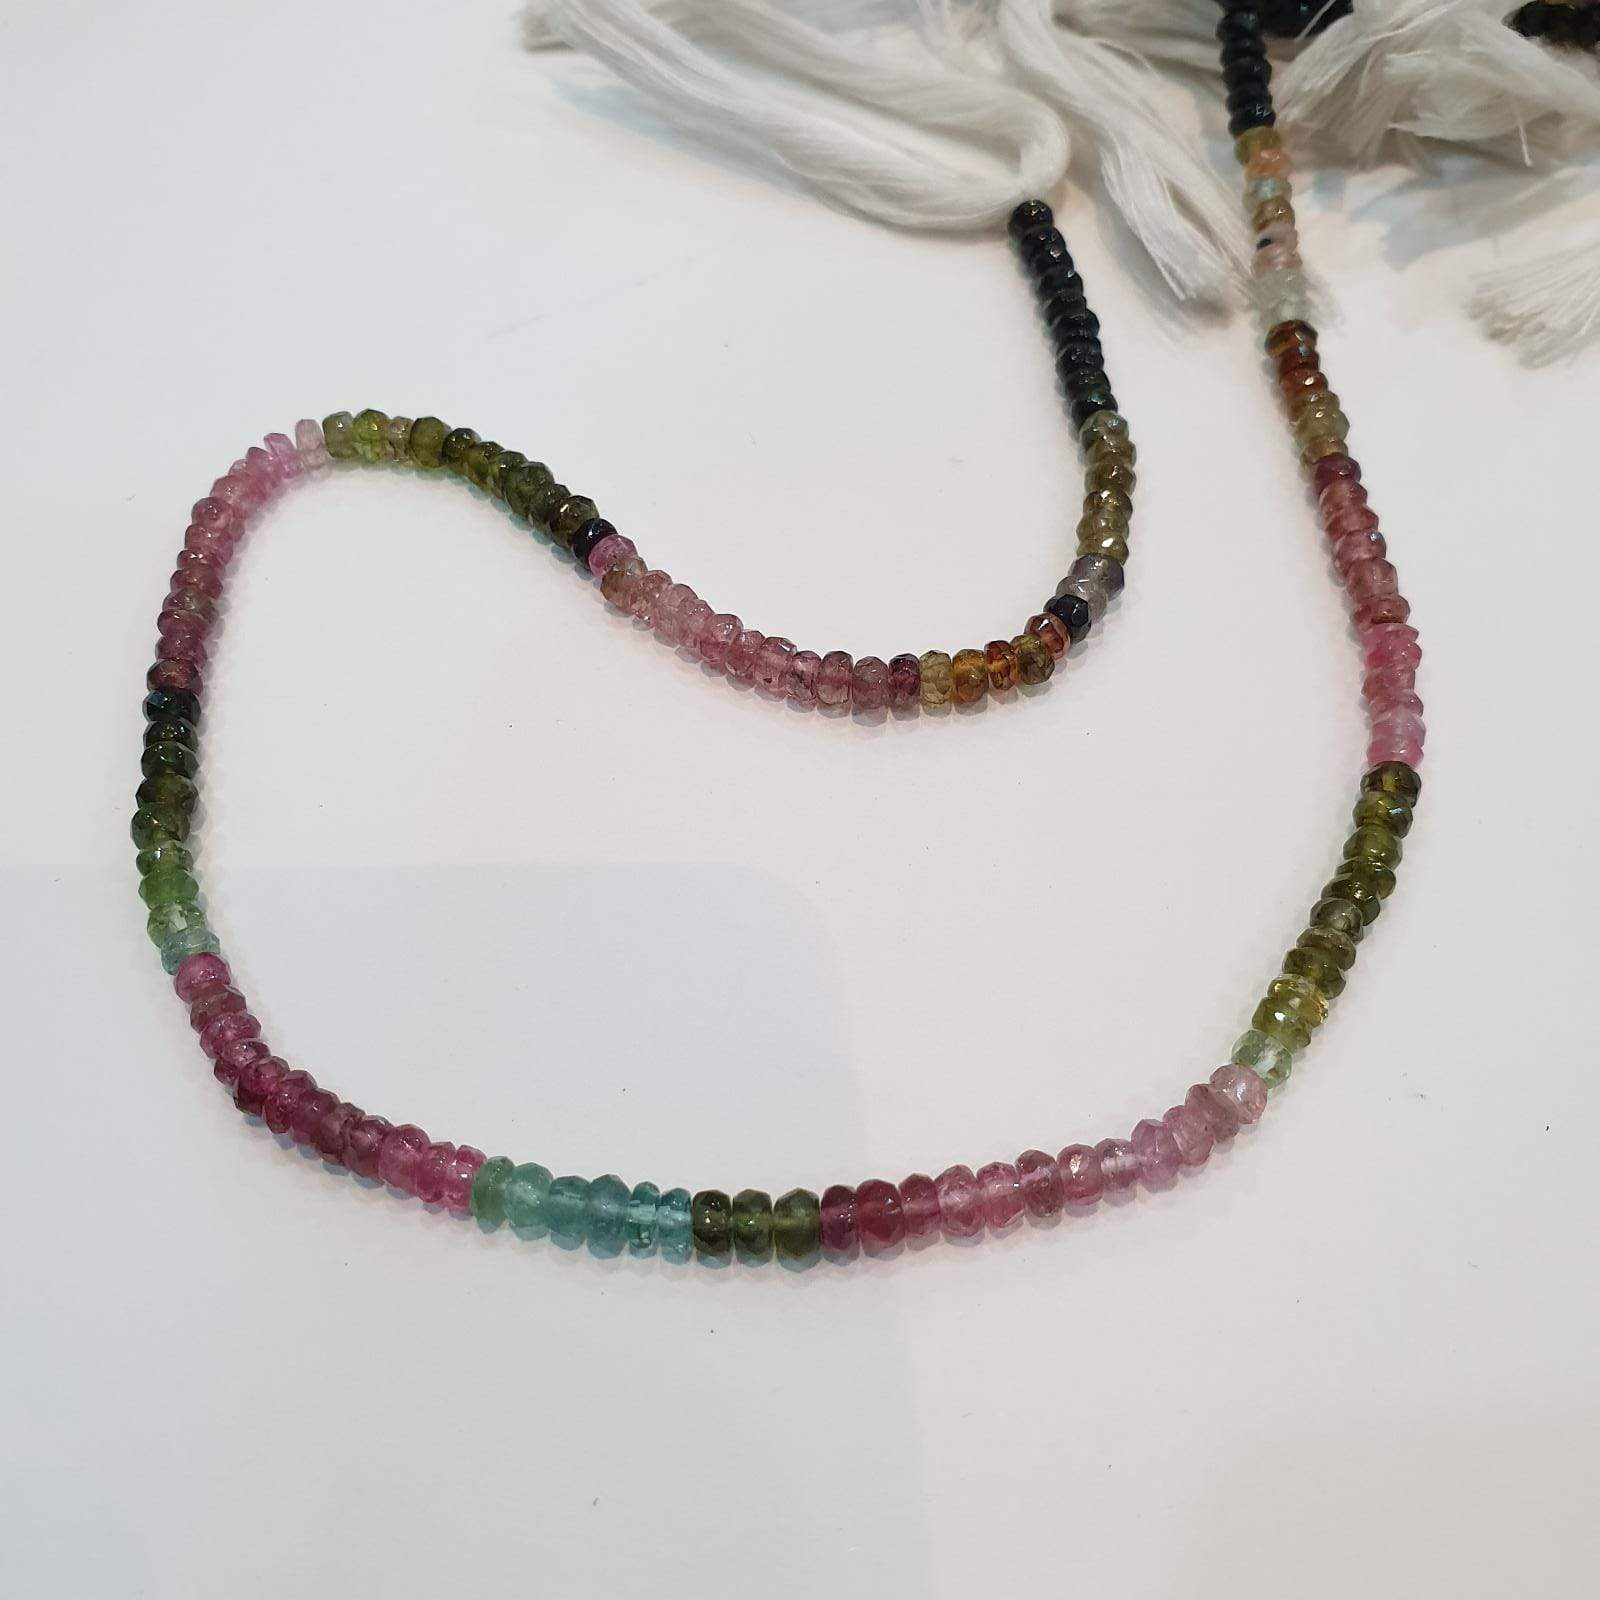 Natural Tourmaline Beads Top Quality 14 Inches 3.5mm Size - The LabradoriteKing